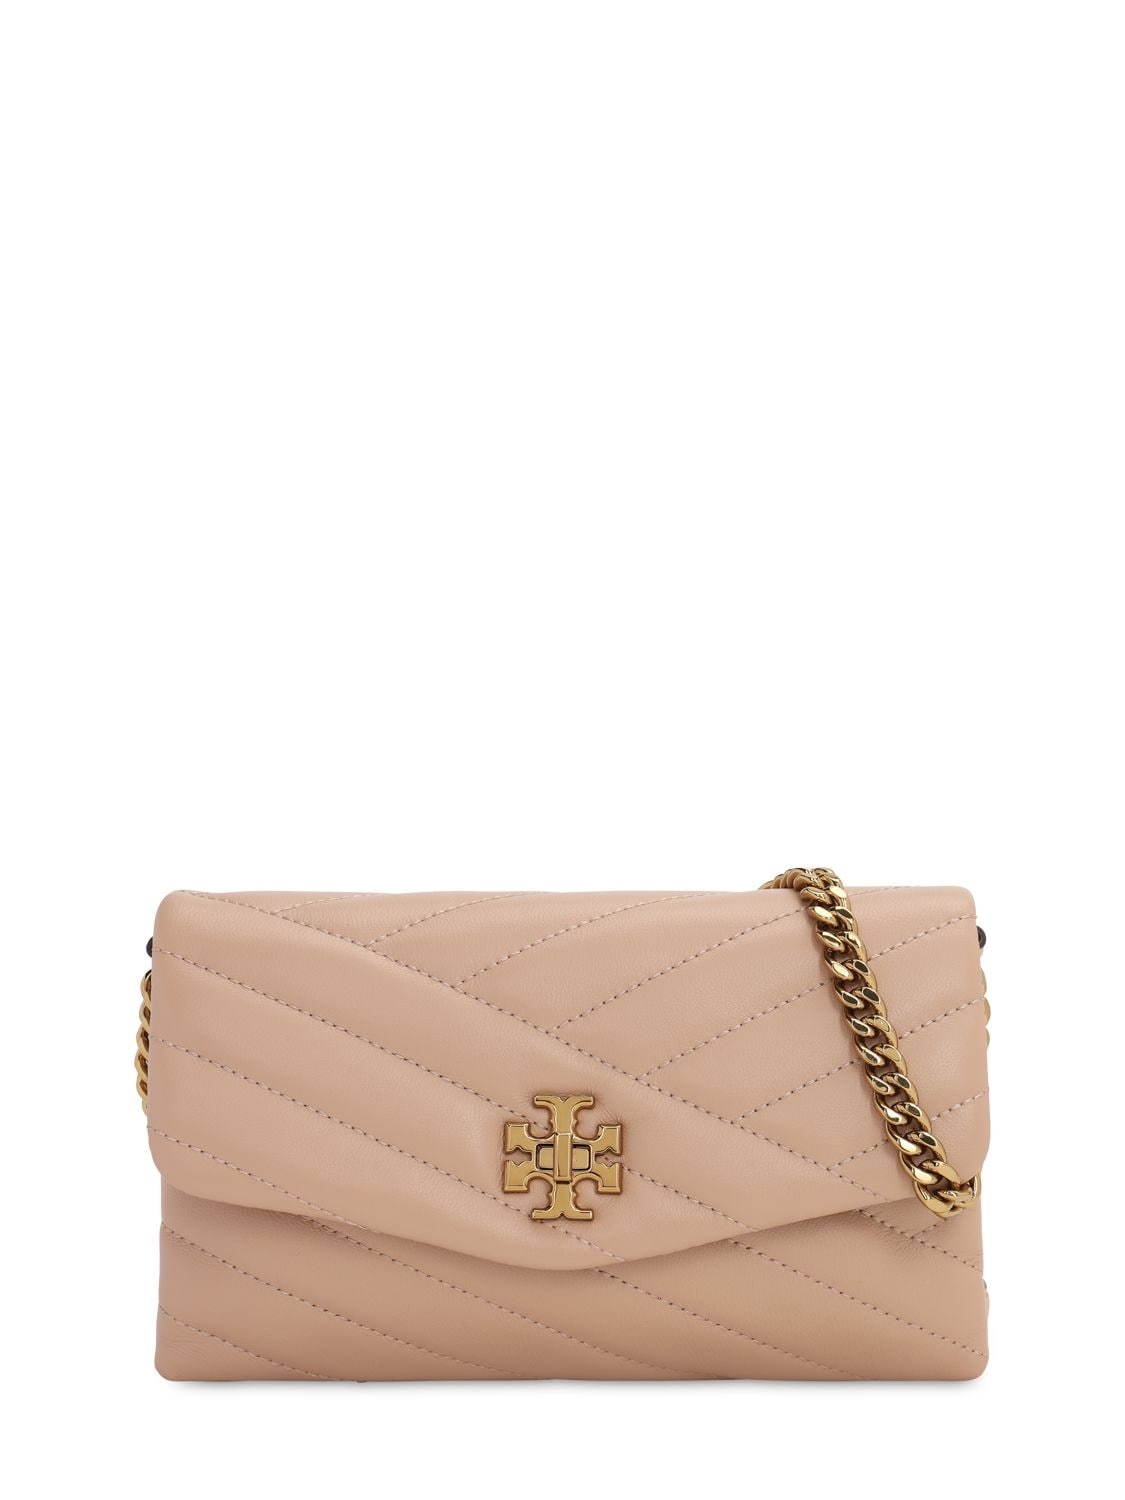 Tory Burch Kira Quilted Leather Chain Wallet Bag In Davon Sand